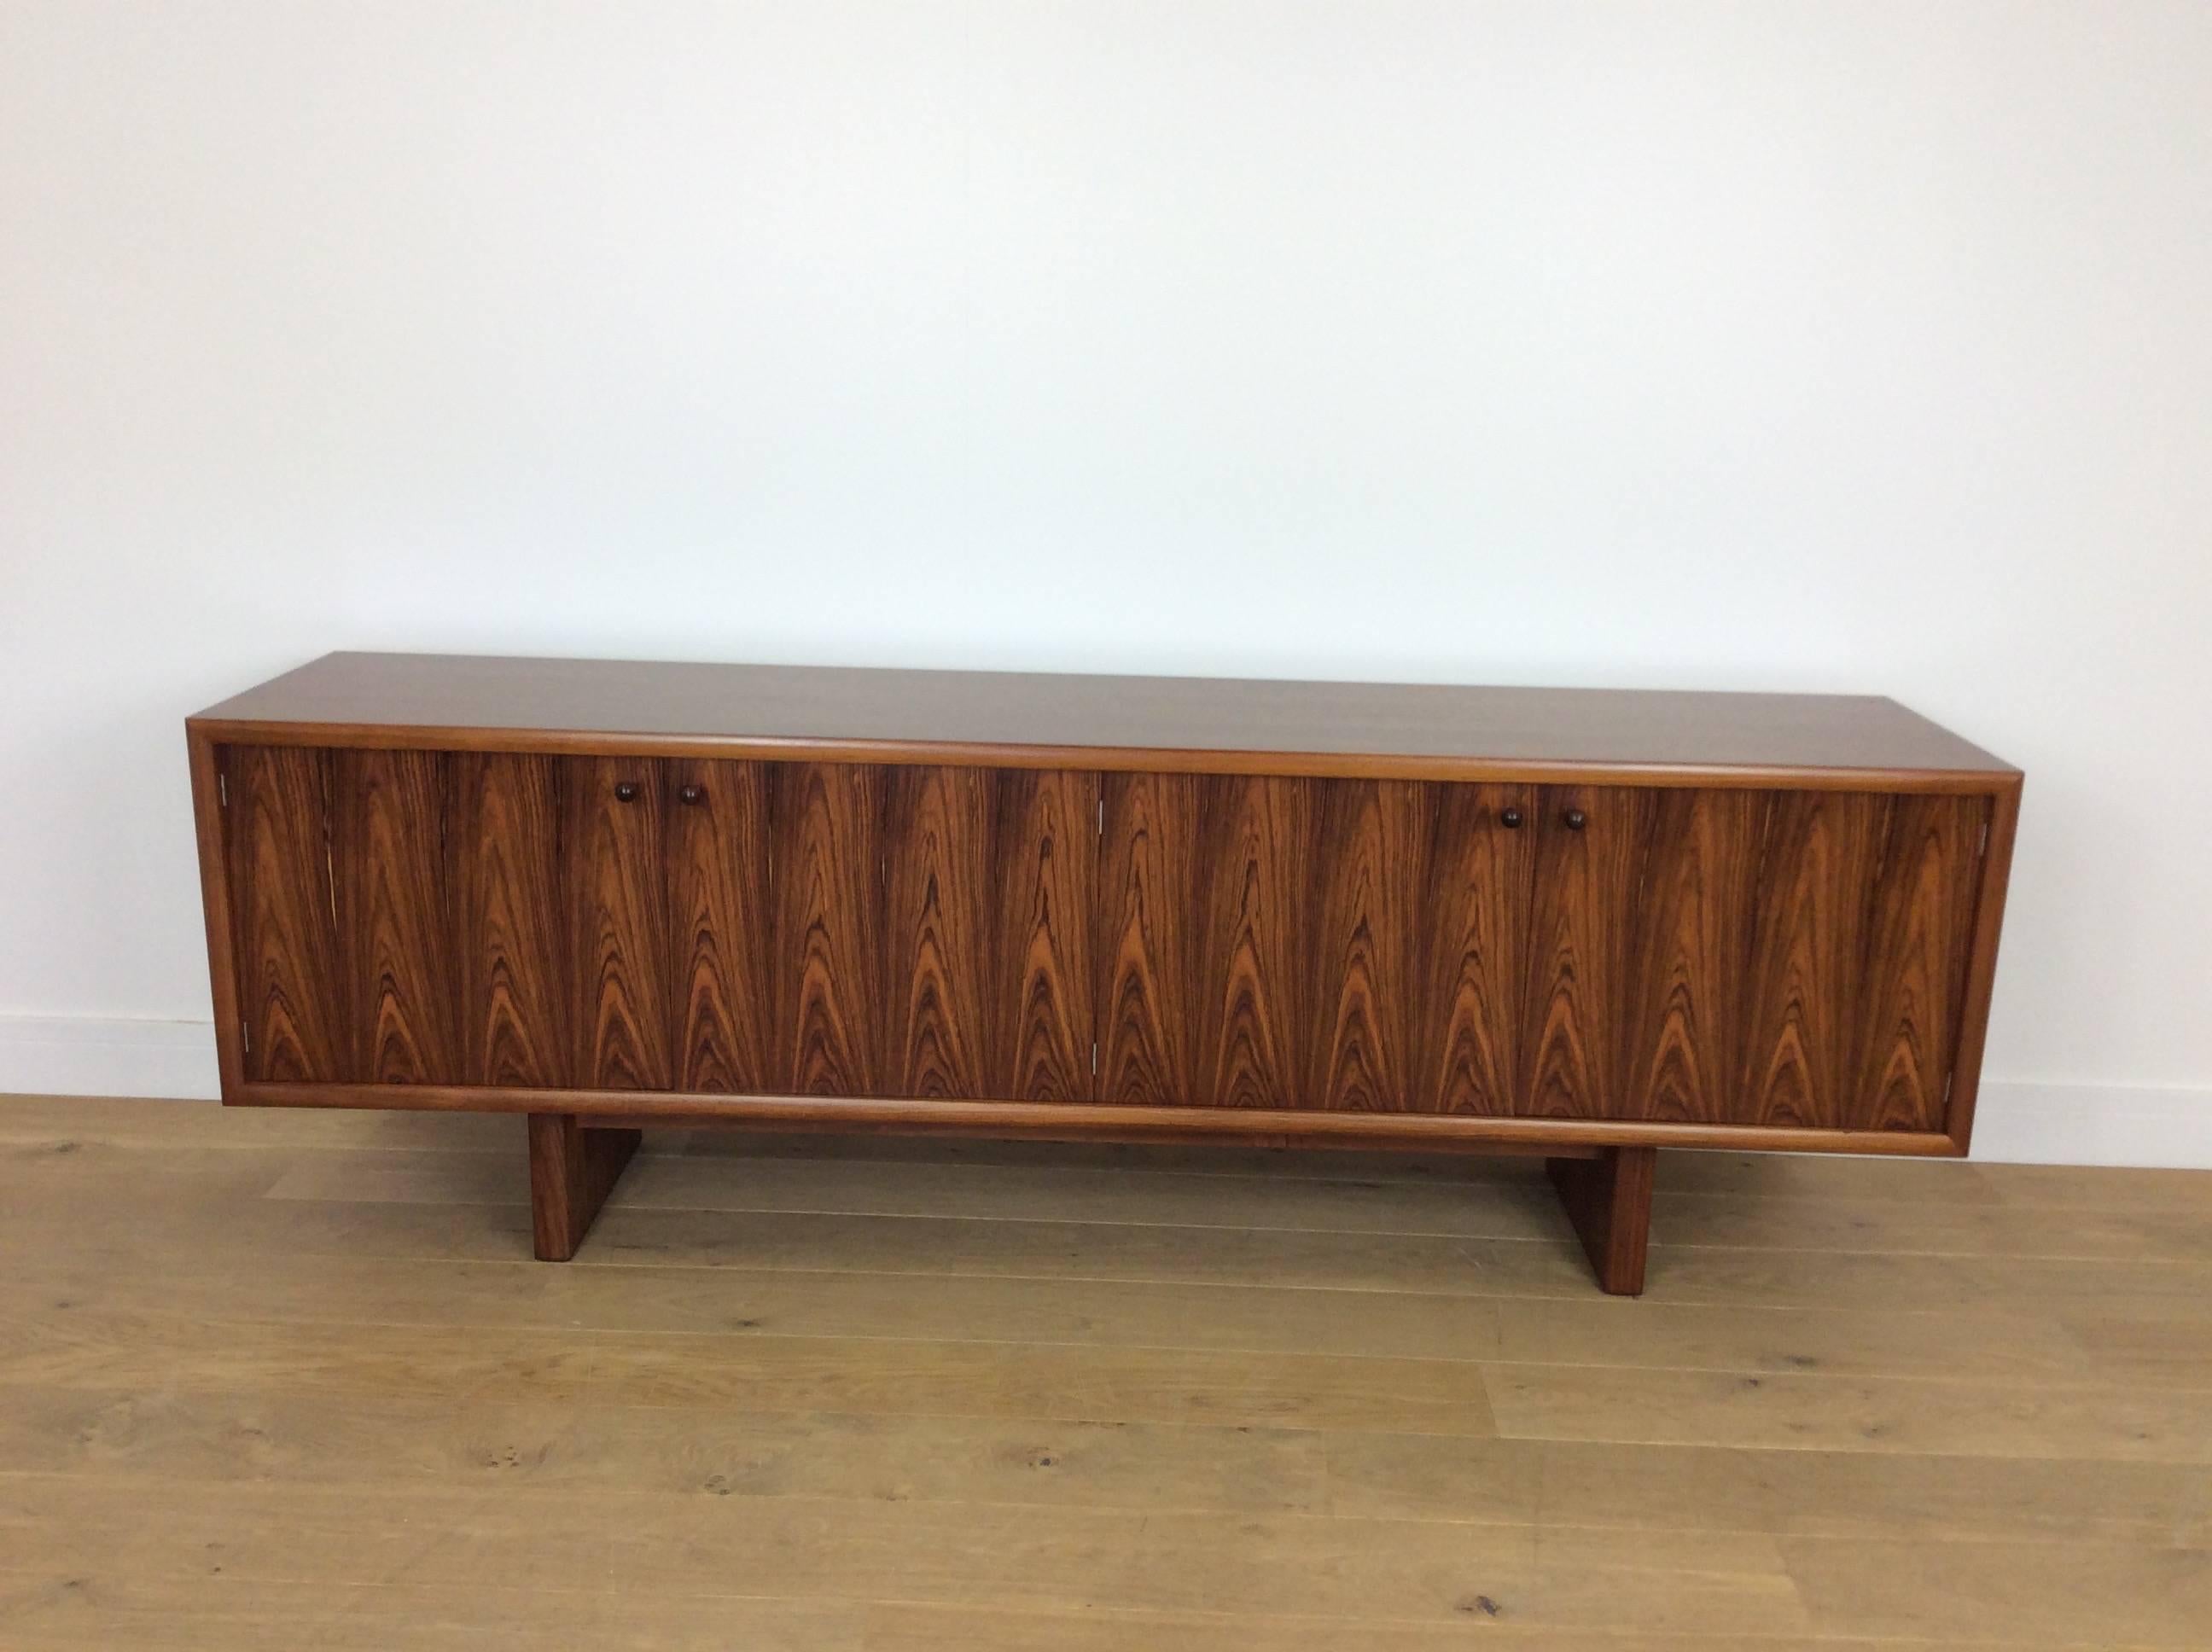 A pair of midcentury sideboards credenzas.
An extremely rare pair of sideboards design by Martin Hall and produced by Gordon Russell in the most stunning rosewood with contrasting maple interior.
Model GR75
British, circa 1975
Measures: 71 cm H,